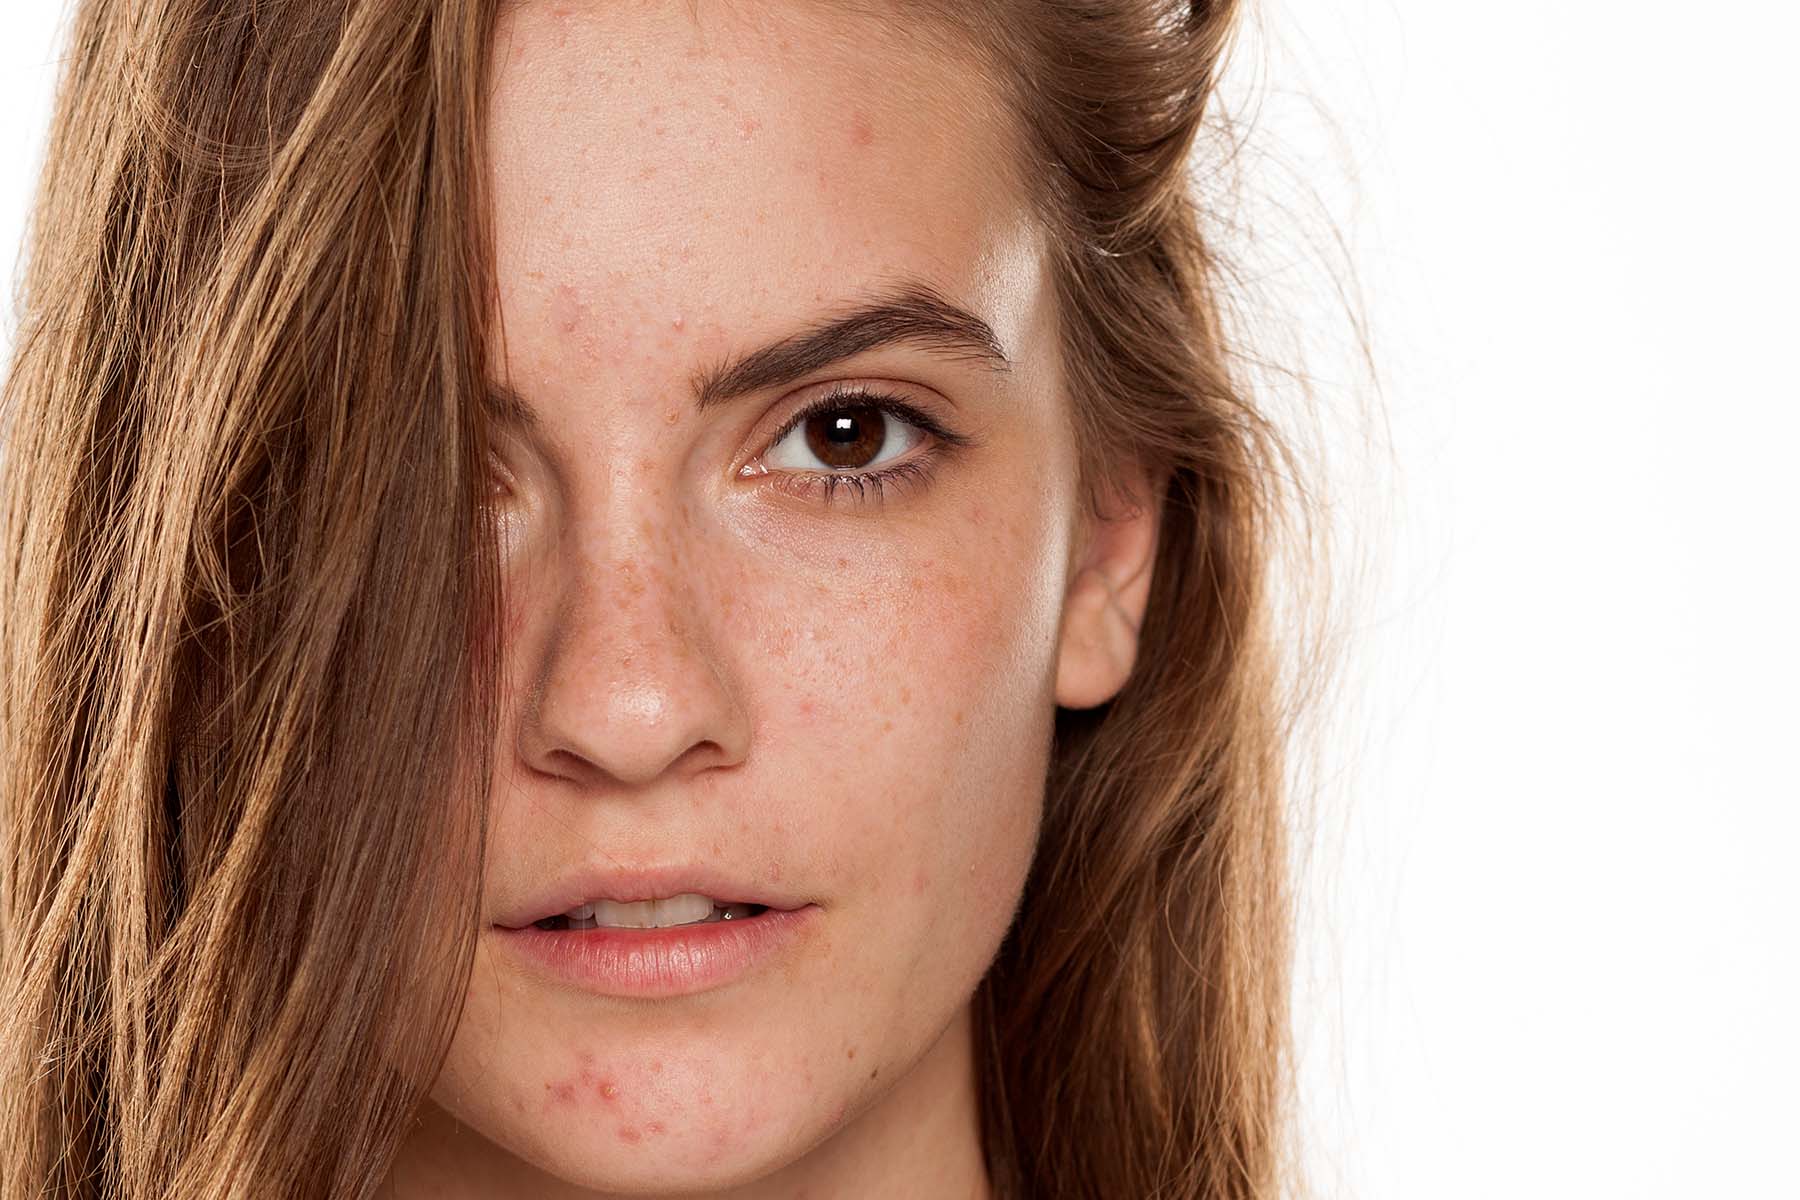 Headshot of pretty young woman with freckles and pimples on her face